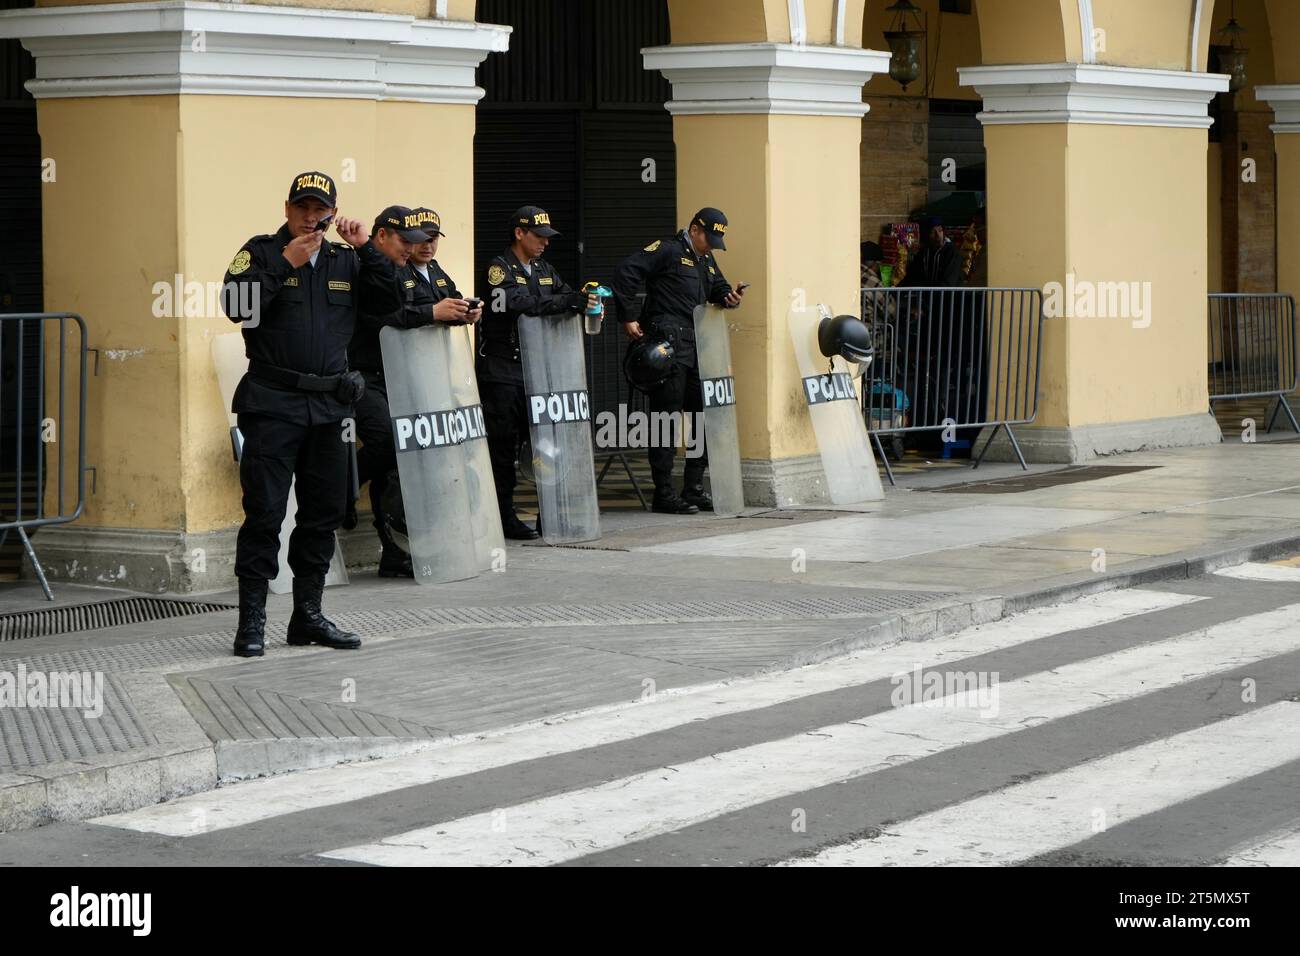 A Group of Police Officers with riot sheilds on Patrol in Lima City Centre. Lima, Peru, October 3, 2023. Stock Photo